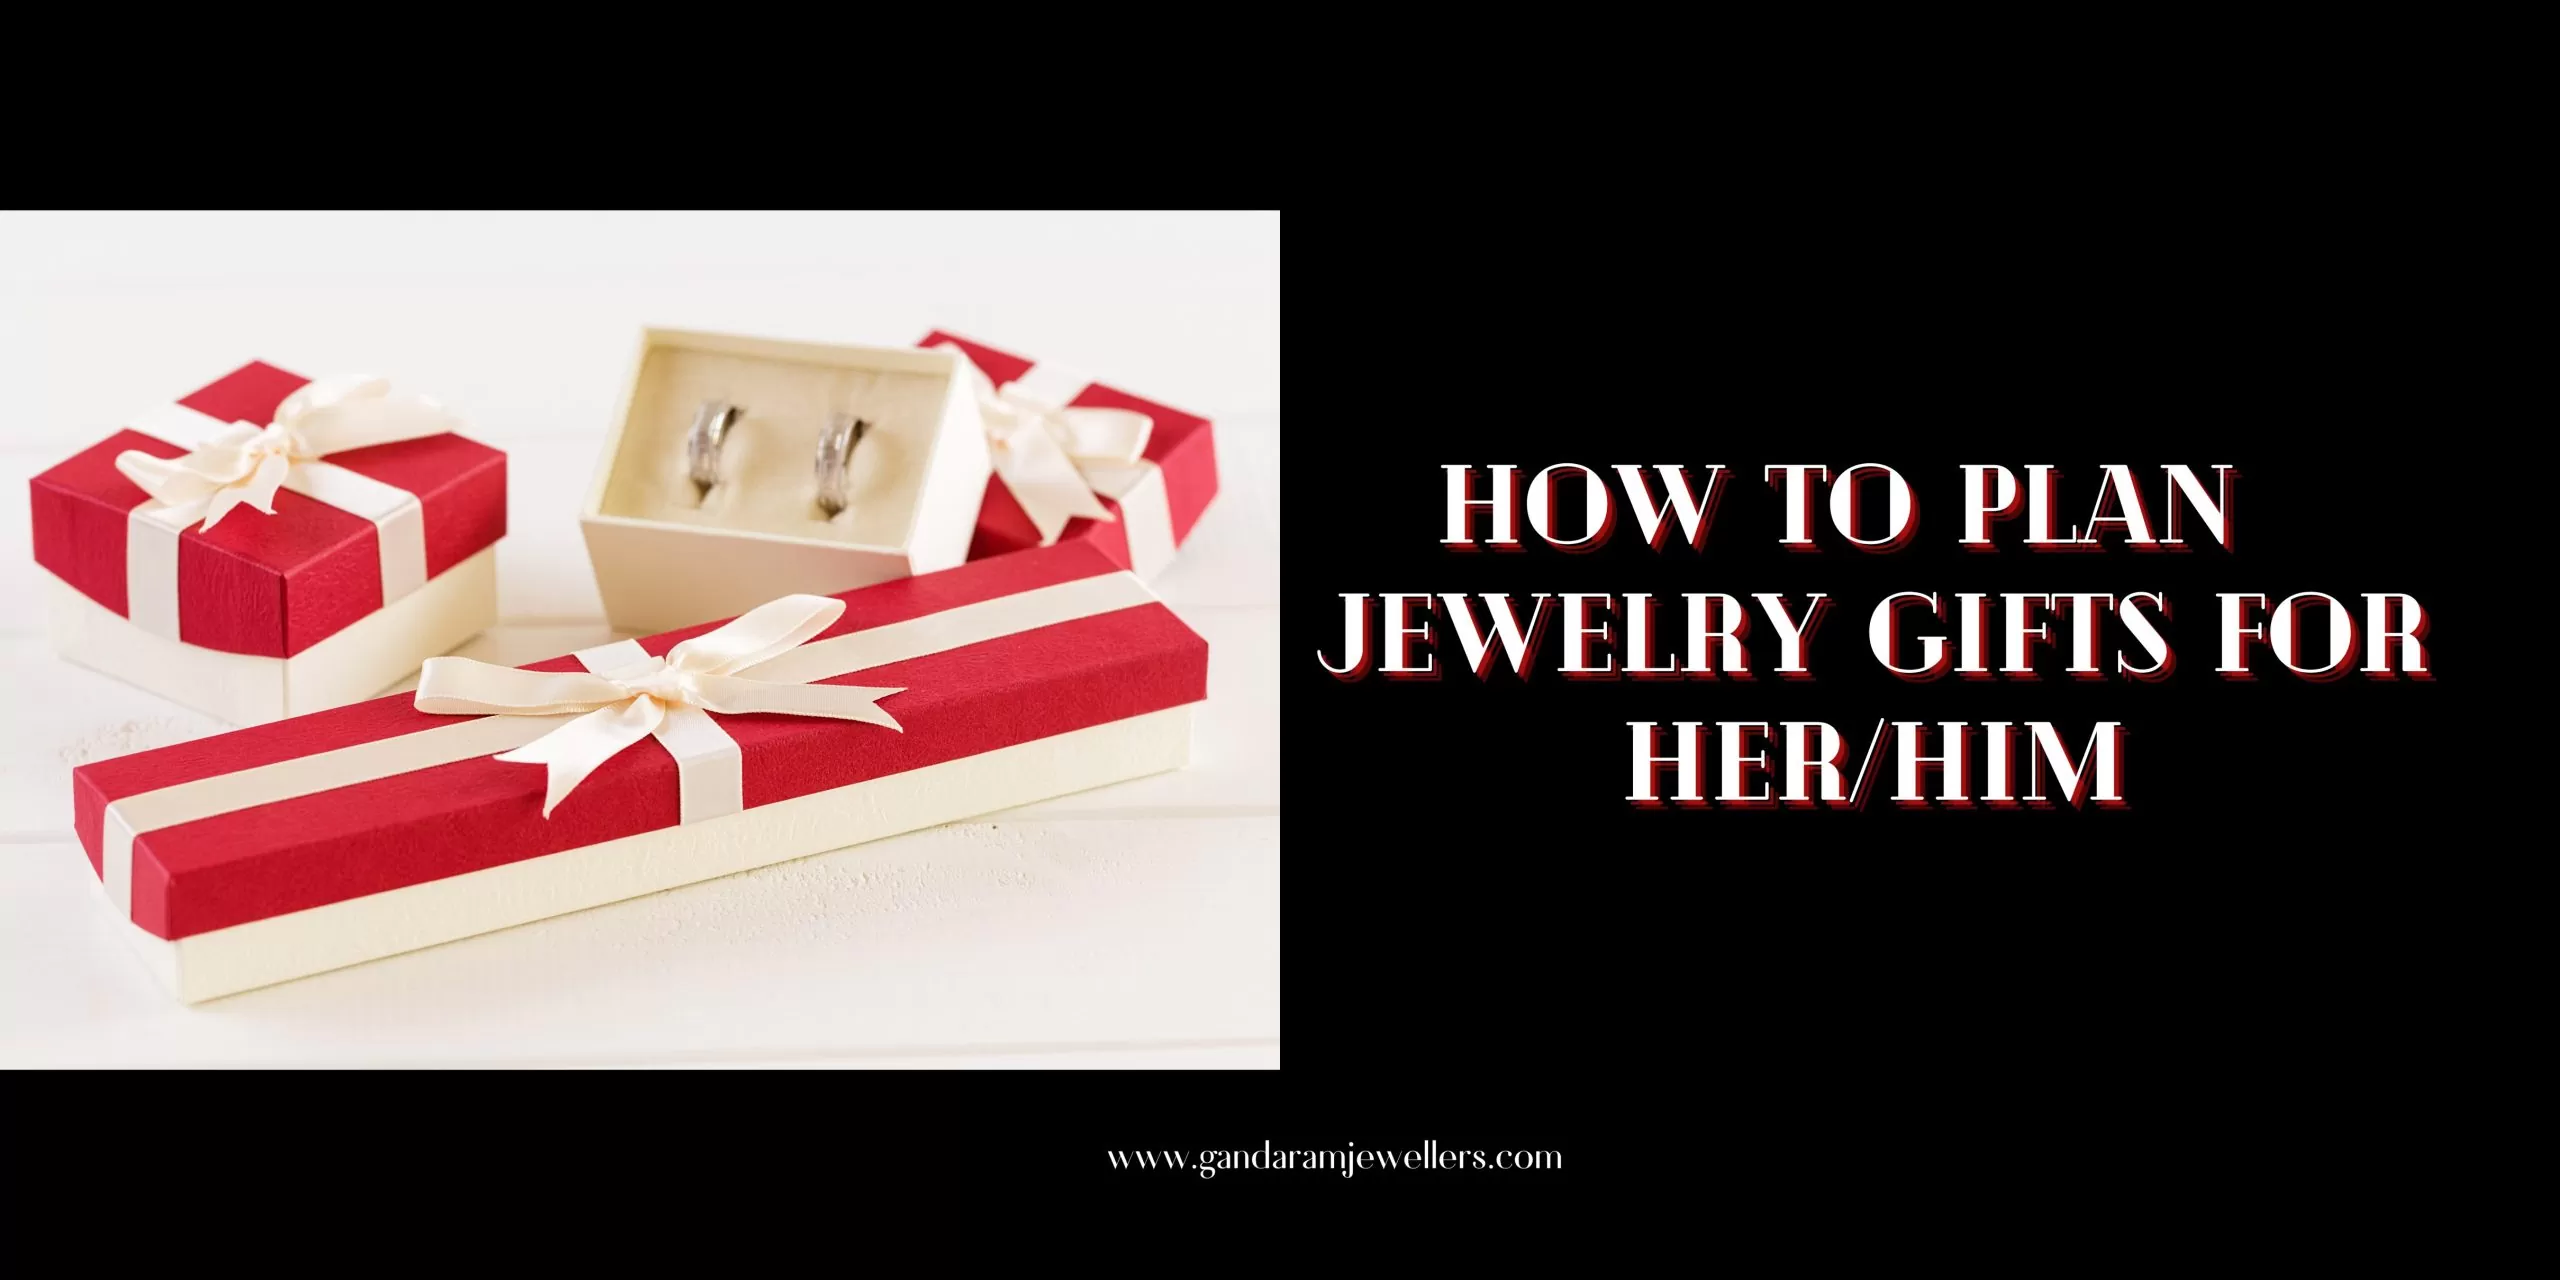 How to Plan Jewelry Gifts For Her/Him